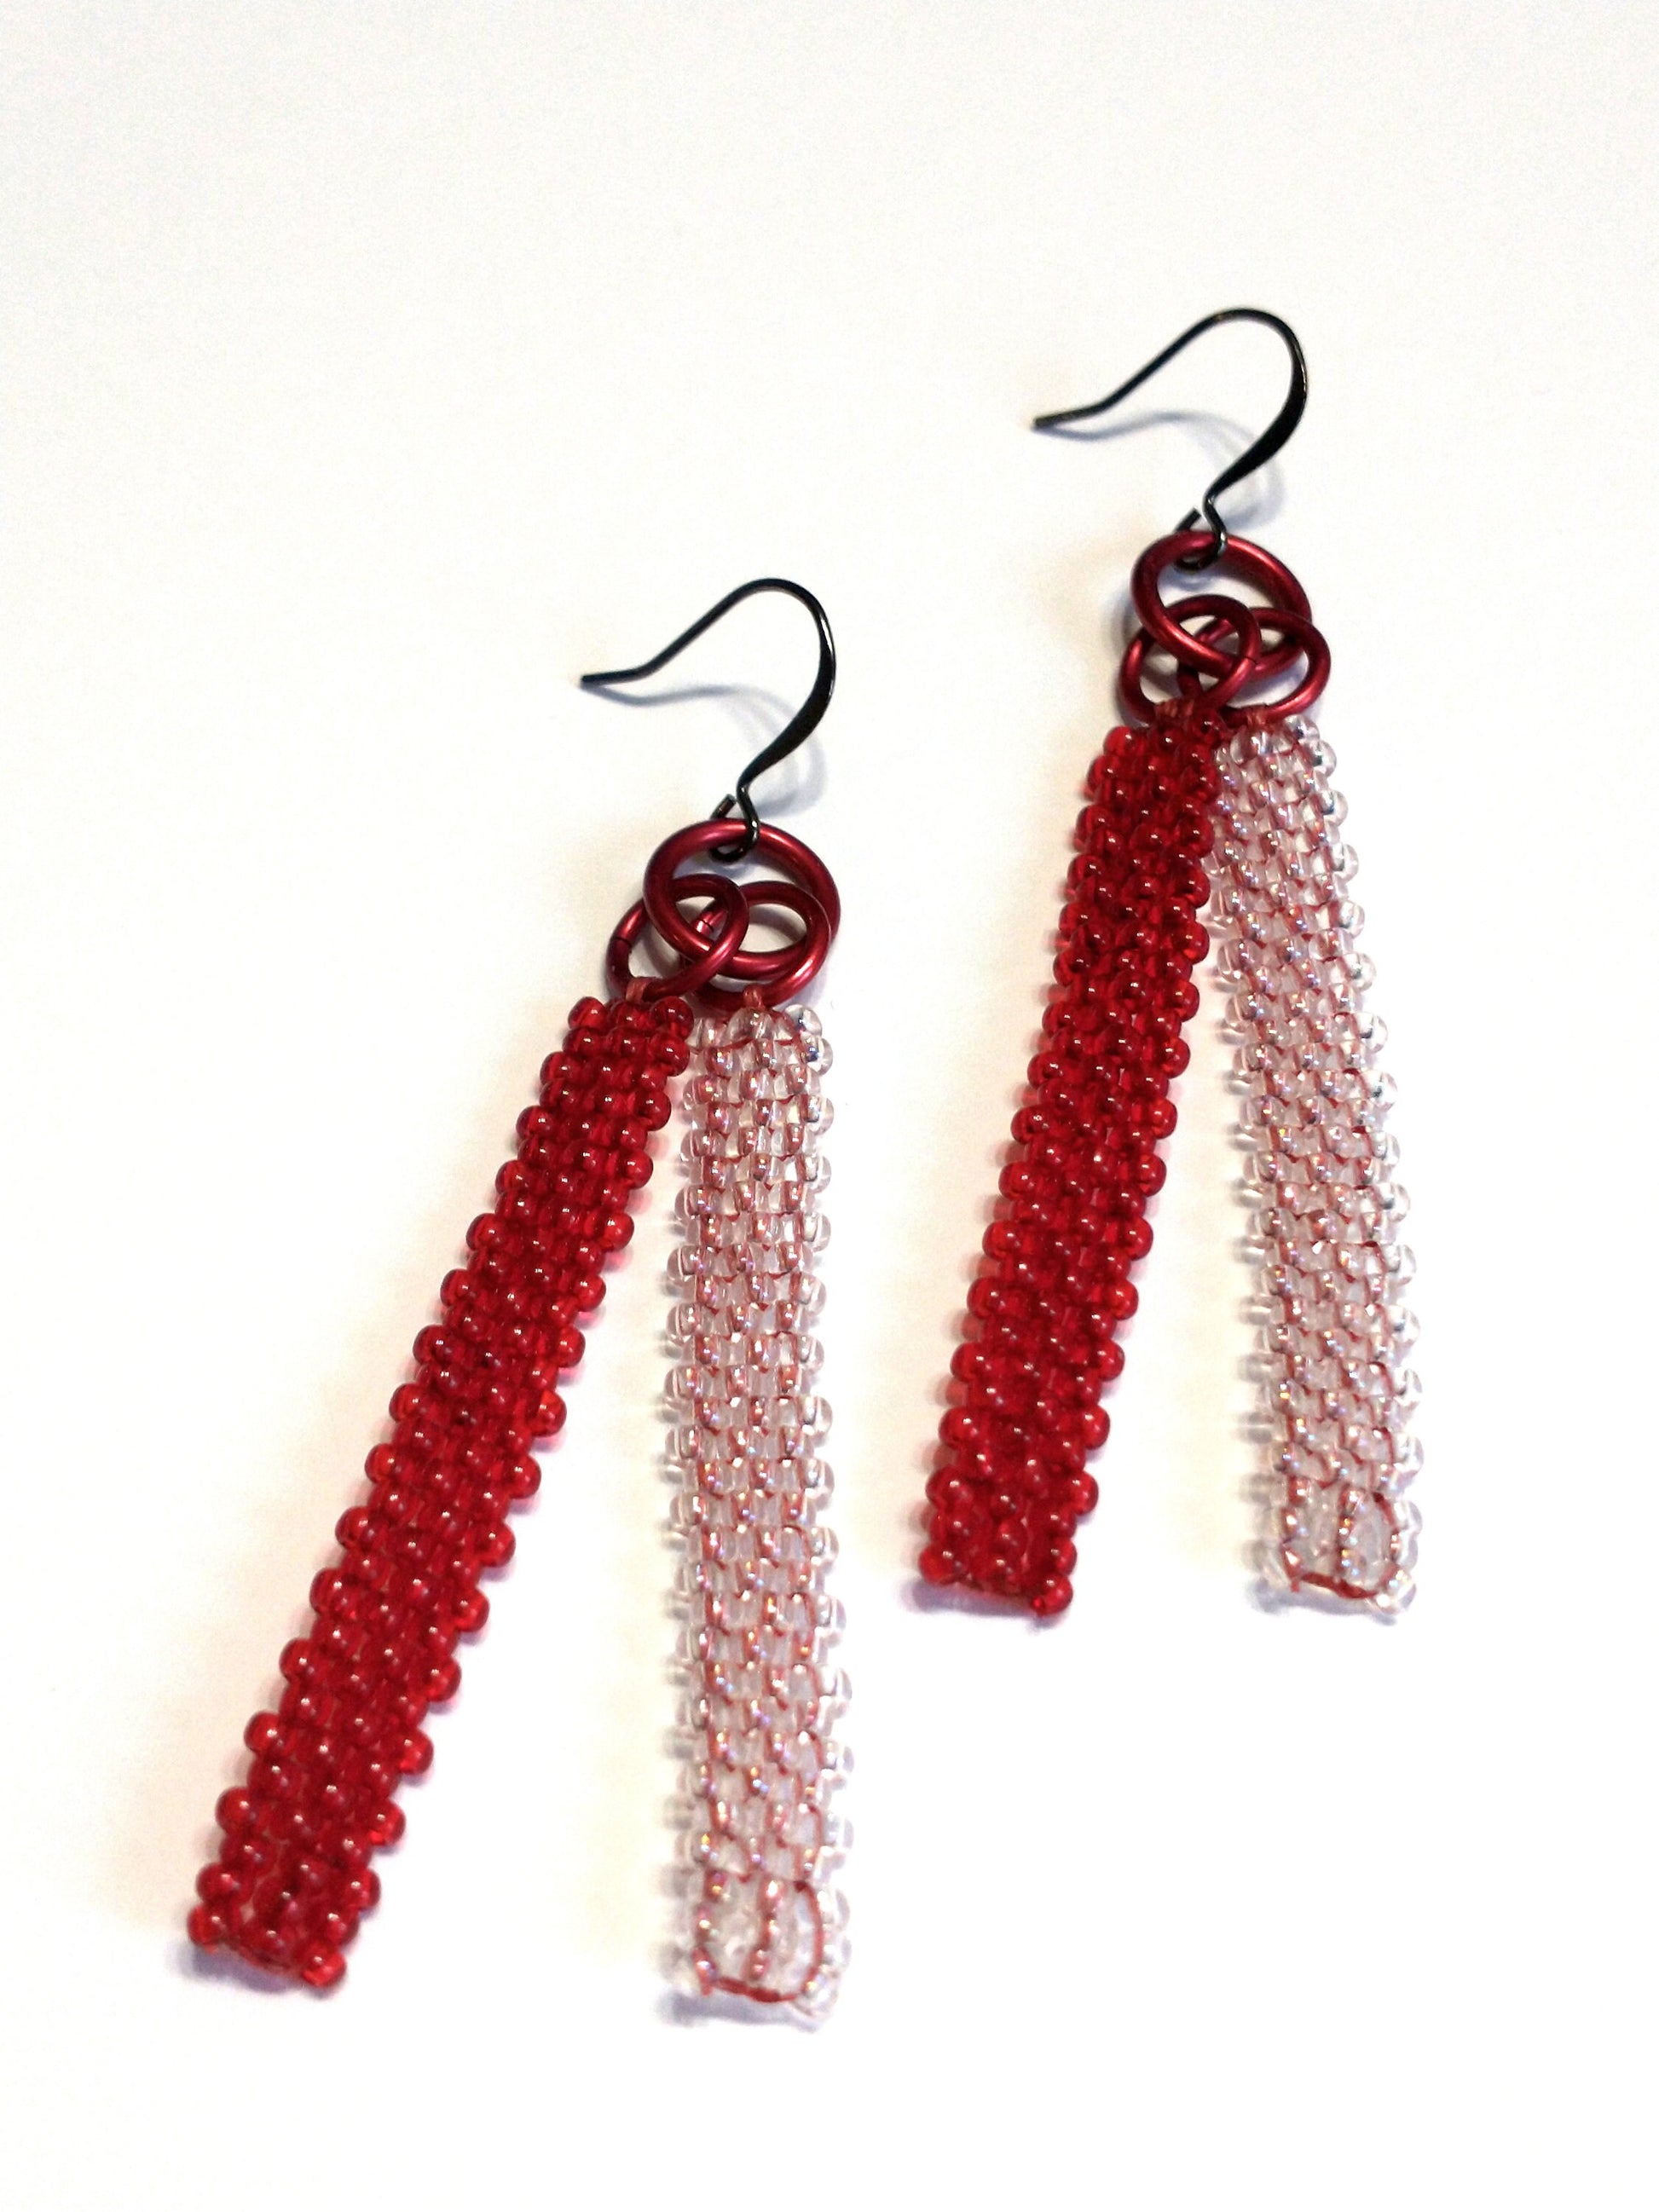 Minimalist Beaded Bar Drop Earrings | Romantic Red & Pink | Tiny Translucent Glass Seed Beads | Handwoven Everyday Dangles | 90s Aesthetic 